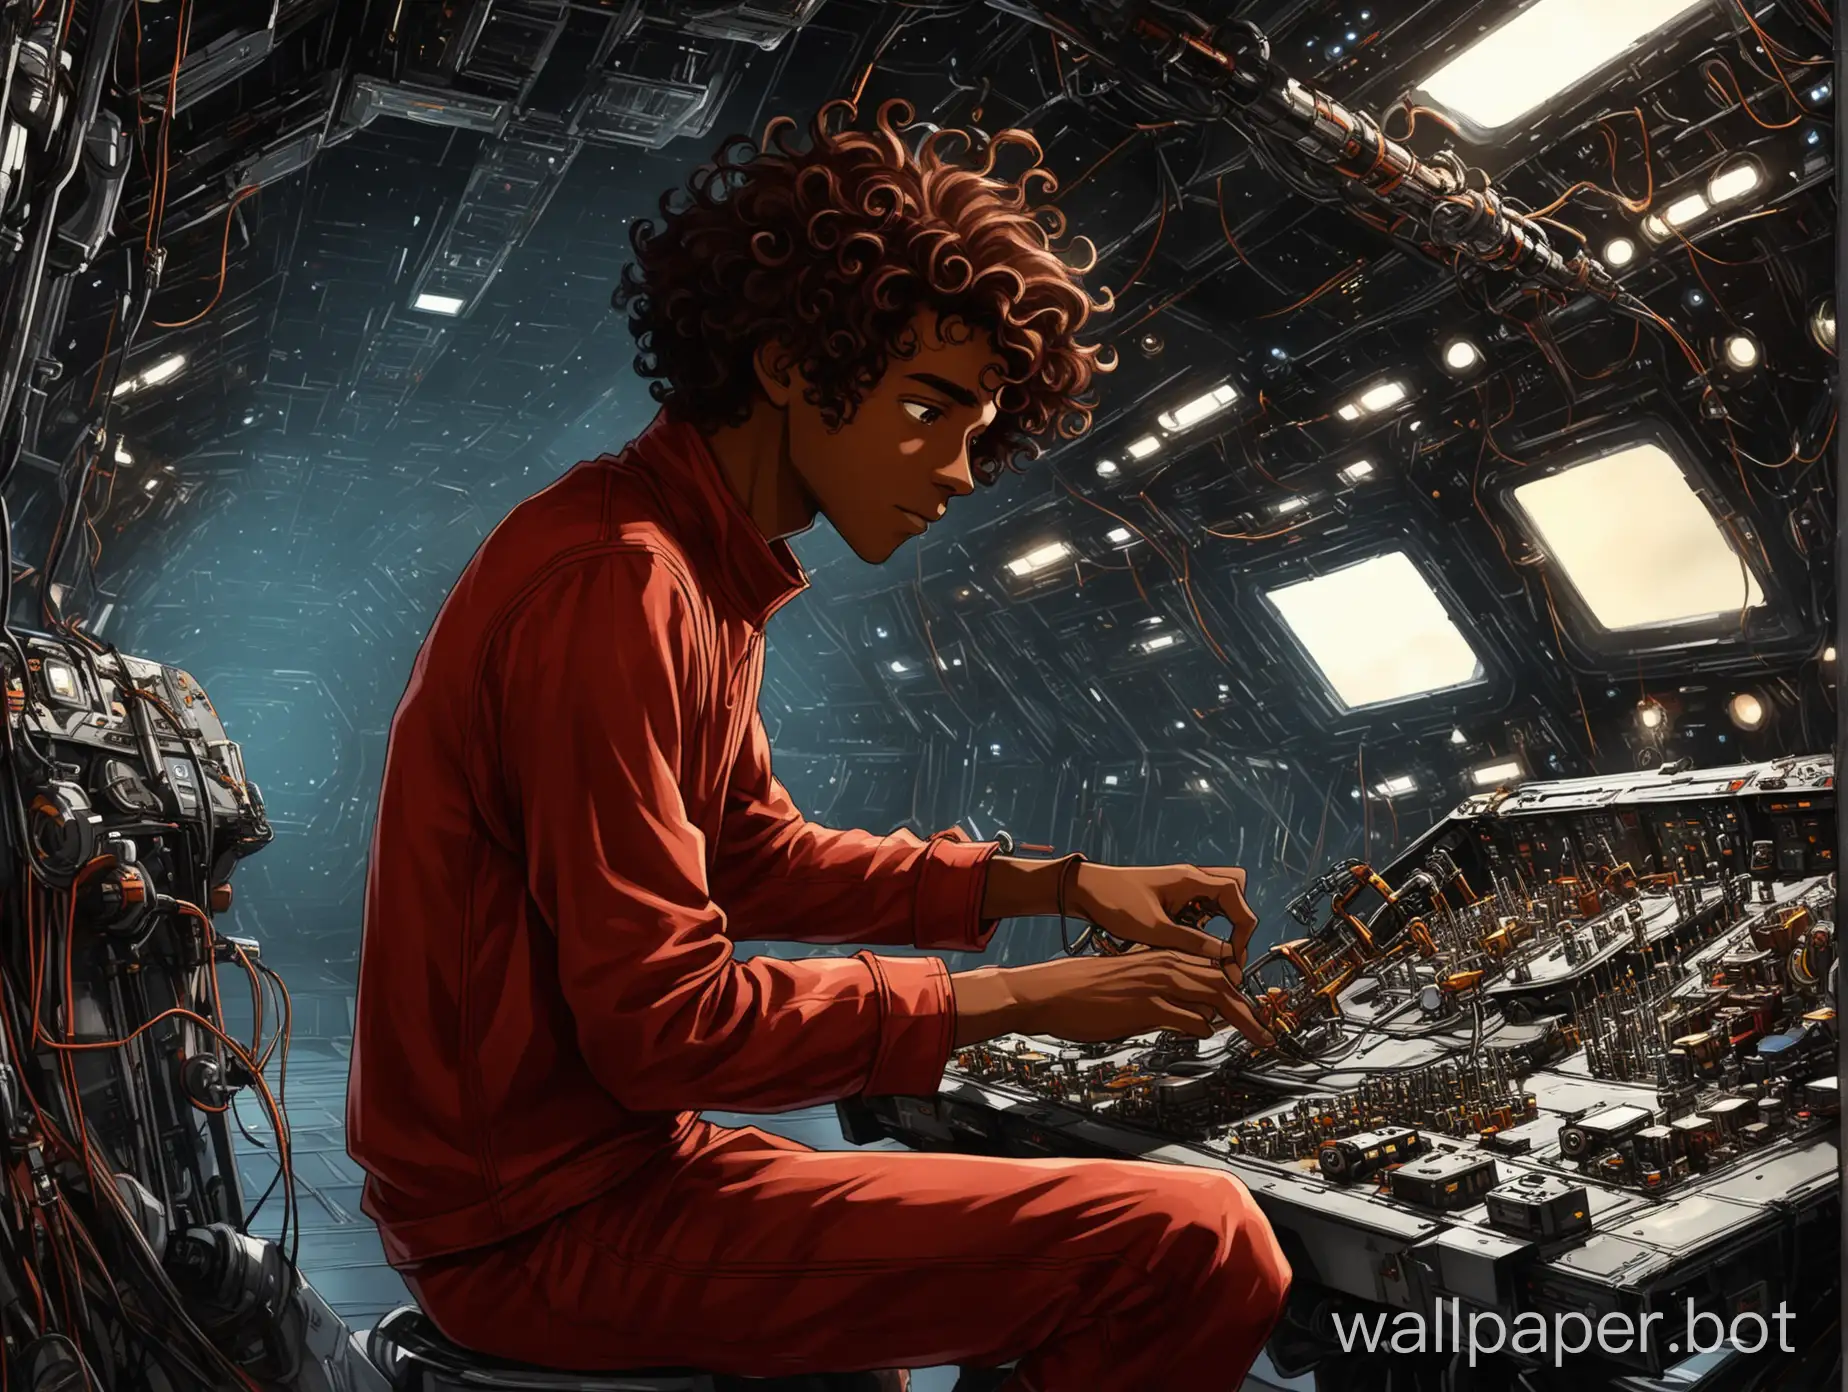 Dark red brown haired young ebony guy with curls in a hangar of a spaceship tinkering on equipment for his band in a future far ahead of us.